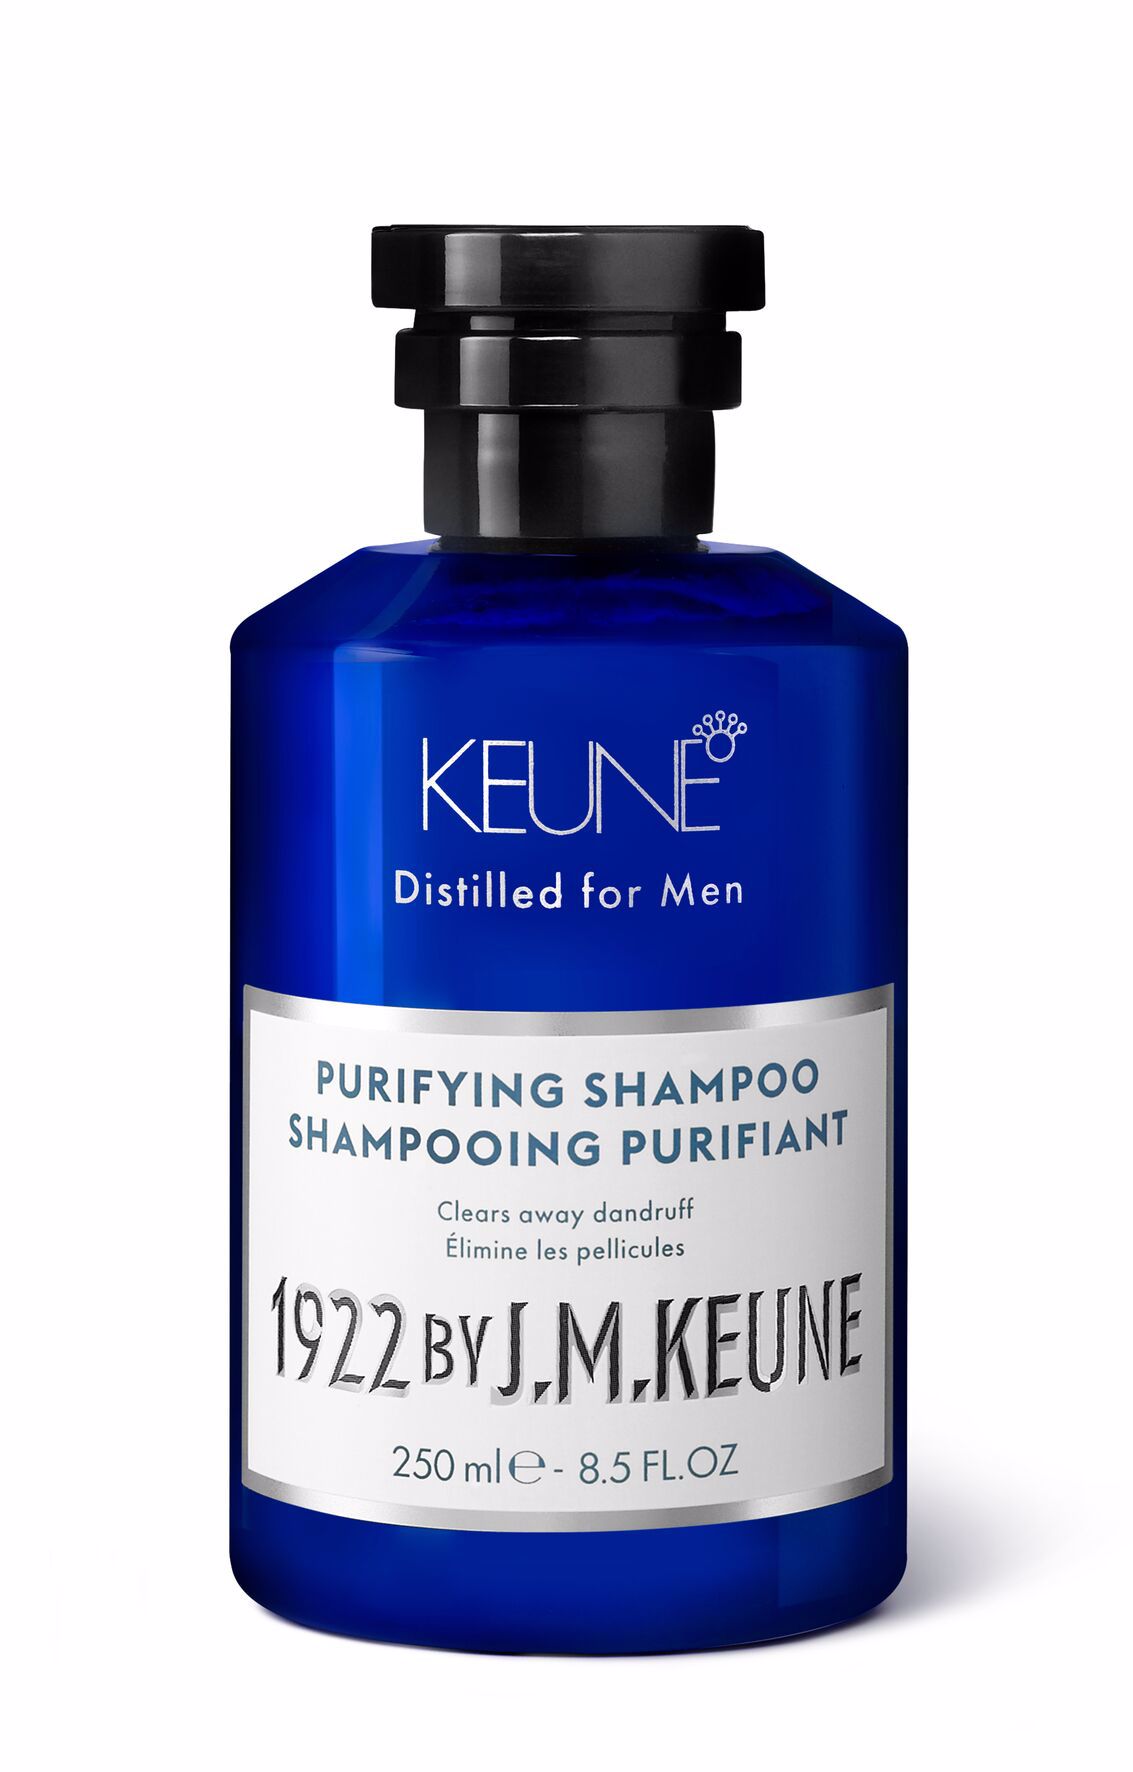 Our effective shampoo for men with oily hair, dandruff-free thanks to zinc pyrithione, and strengthened hair with creatine. Discover more about our 1922 Purifying Shampoo on Keune.ch.